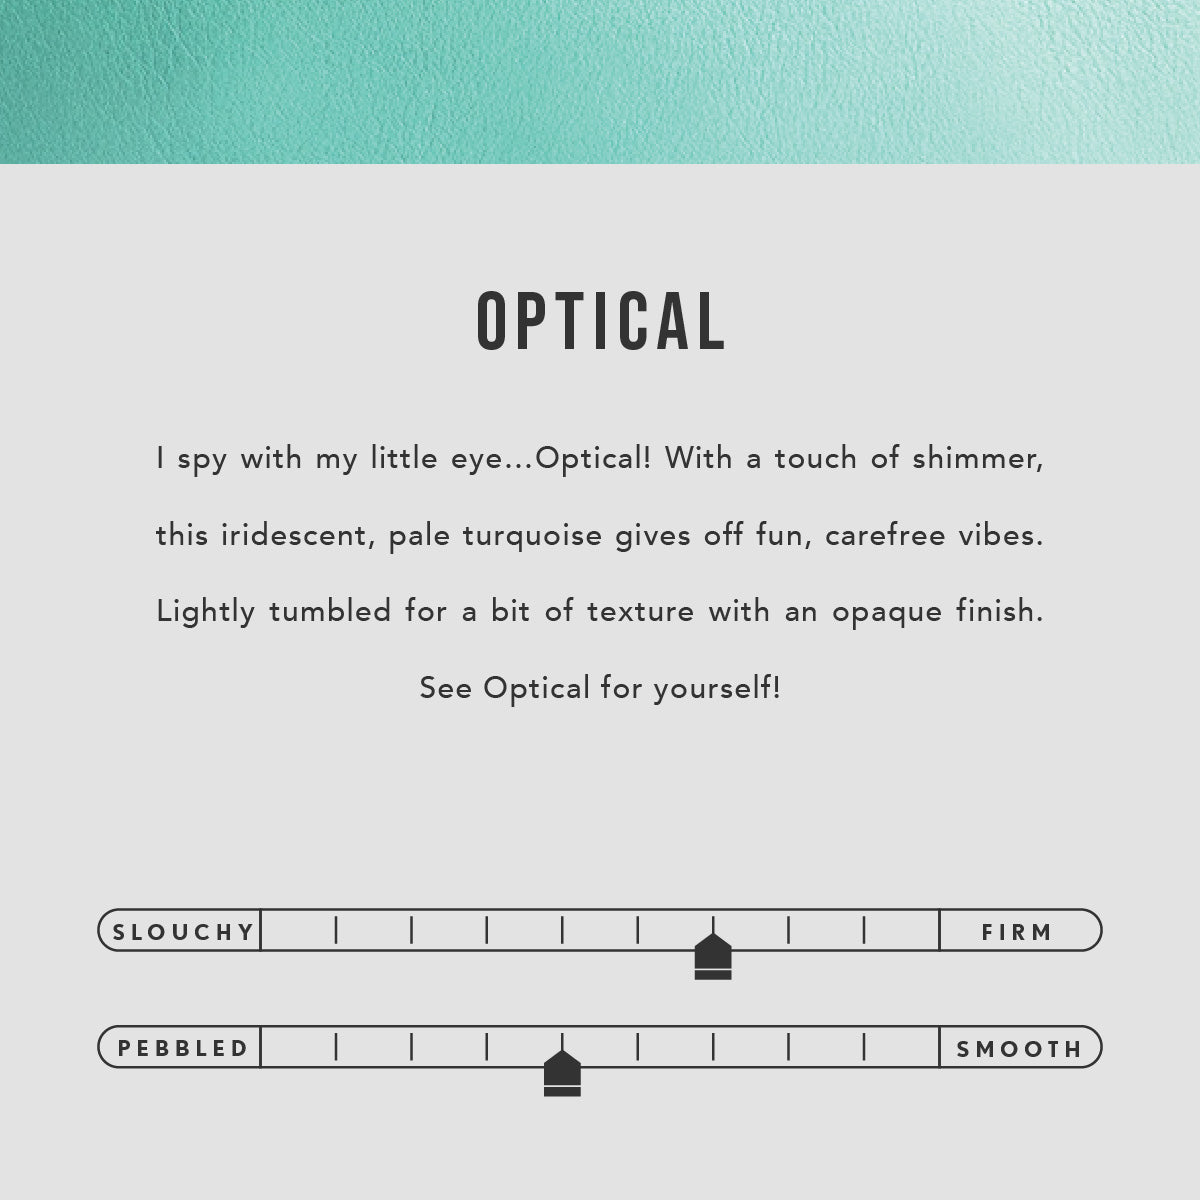 Optical | infographic